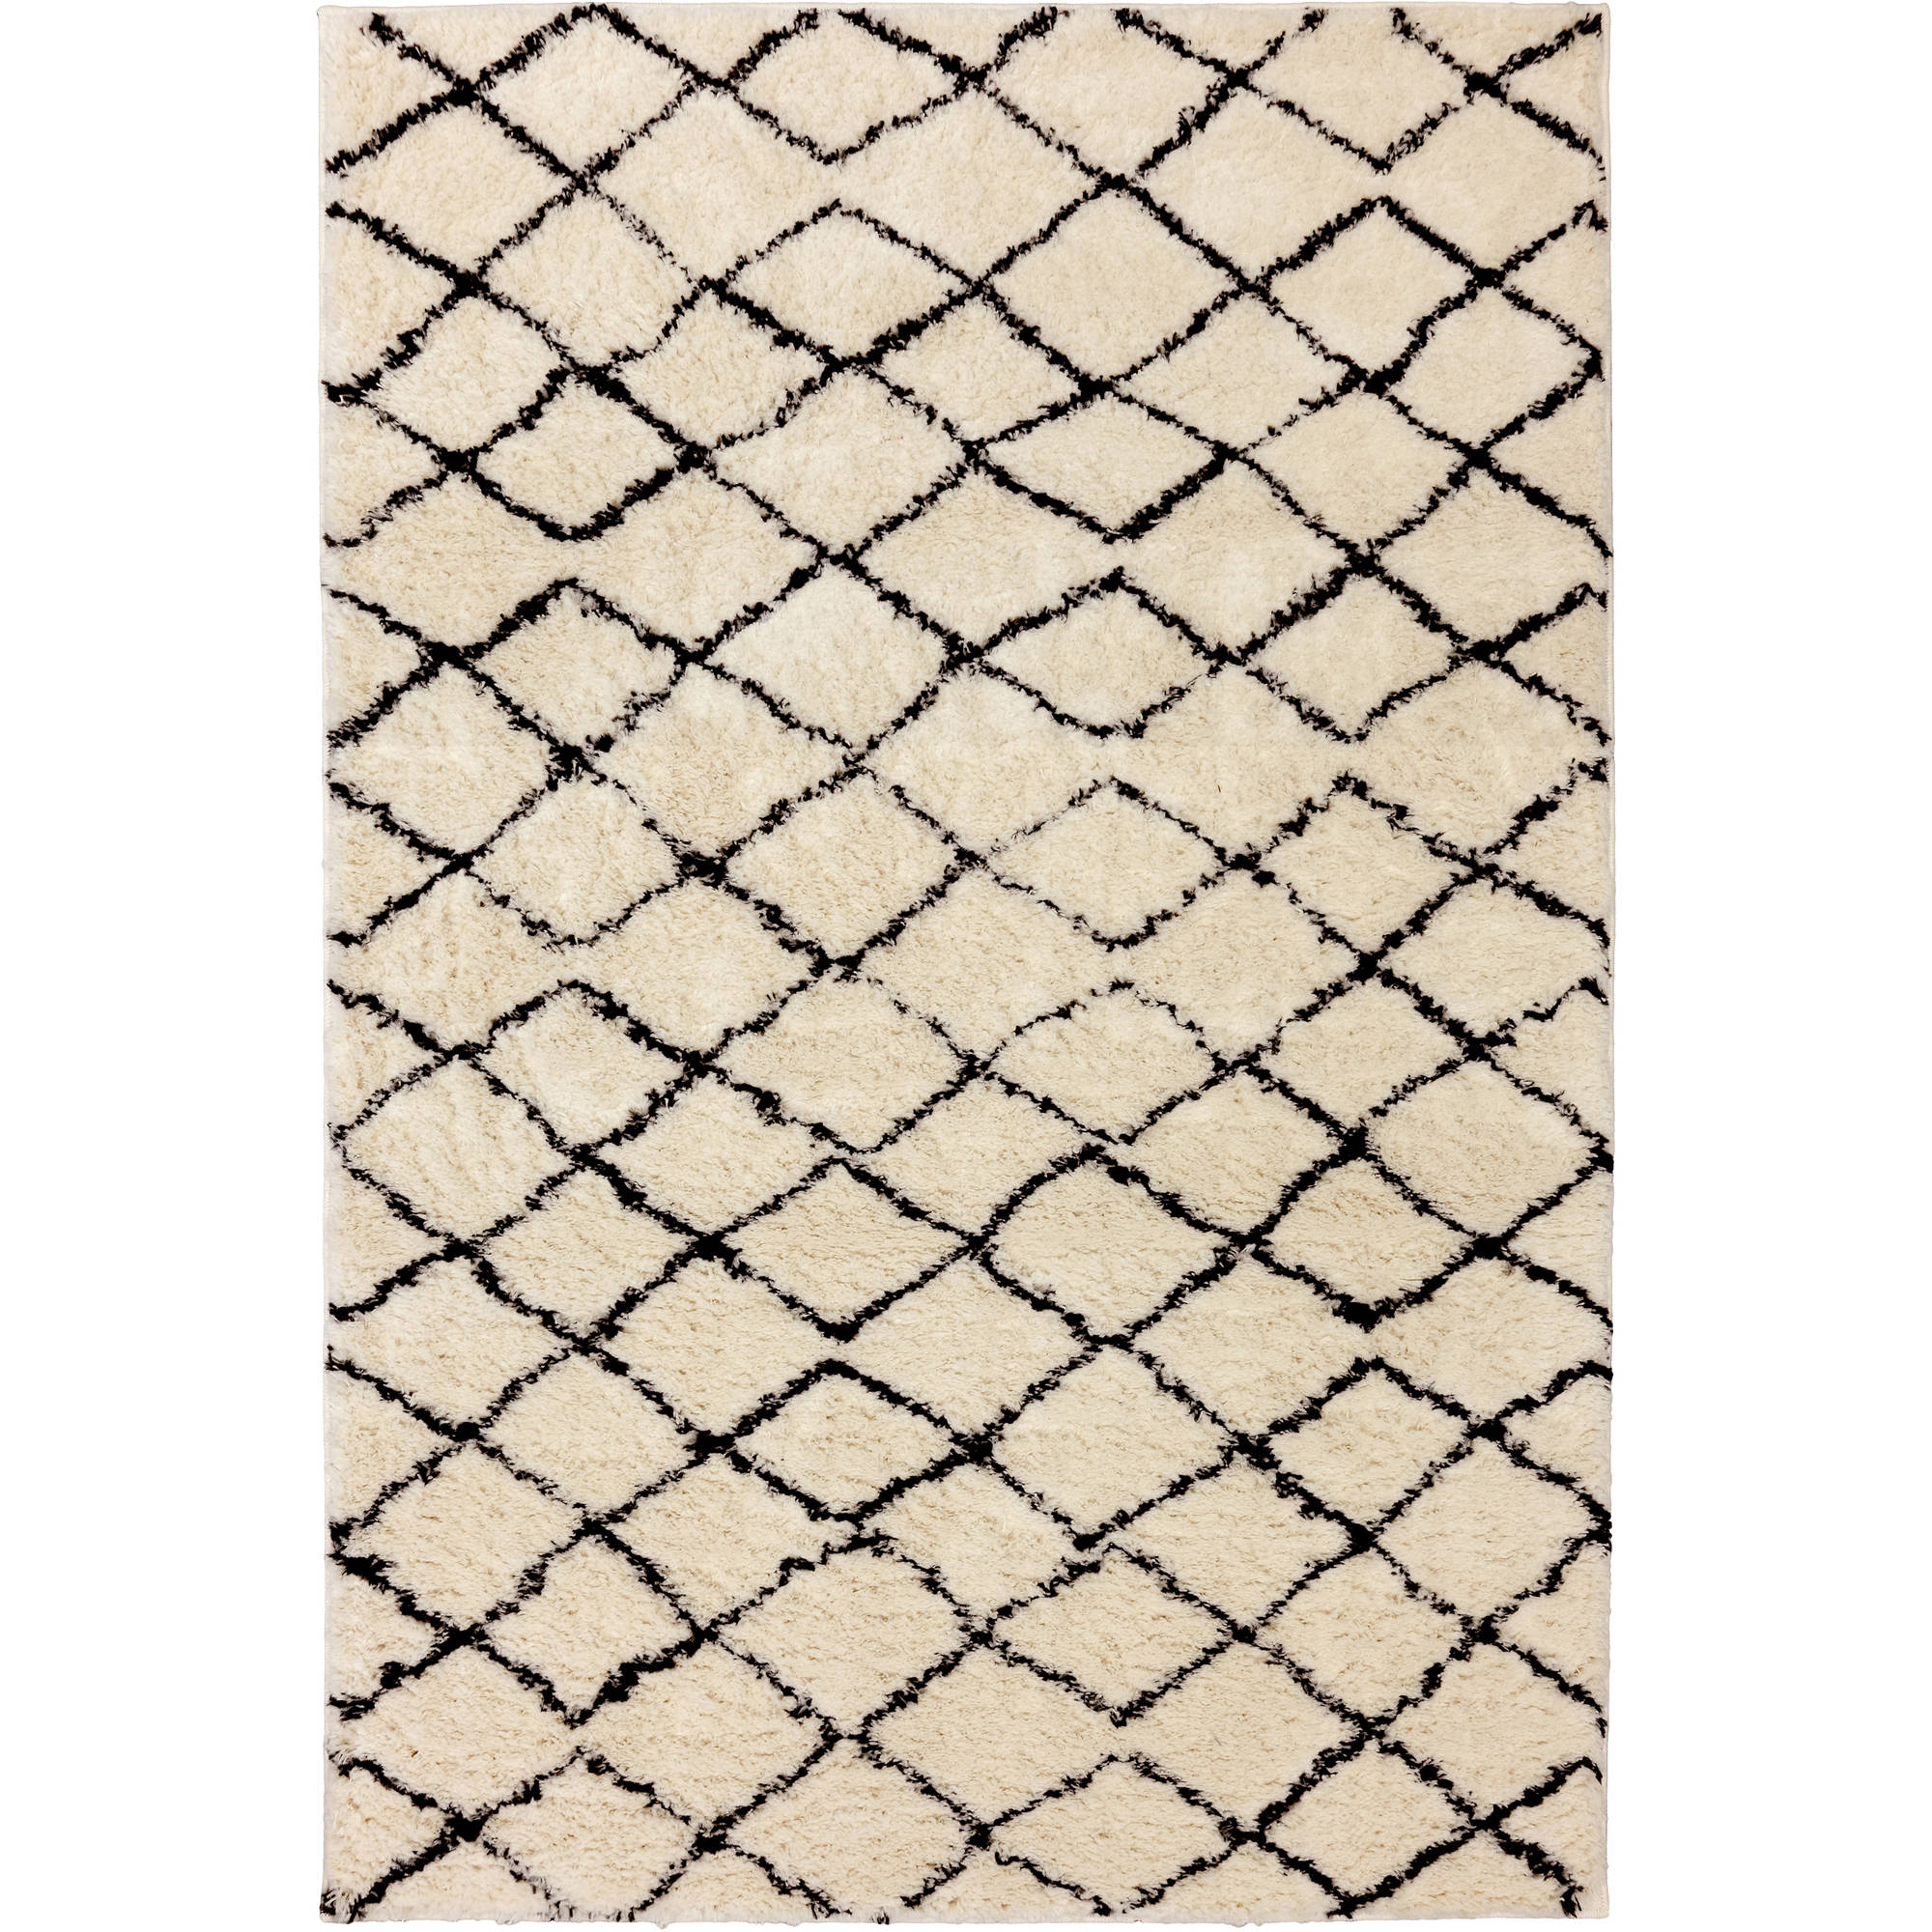 Better Homes and Gardens Moroccan Cream Woven Area Rug - image 1 of 4